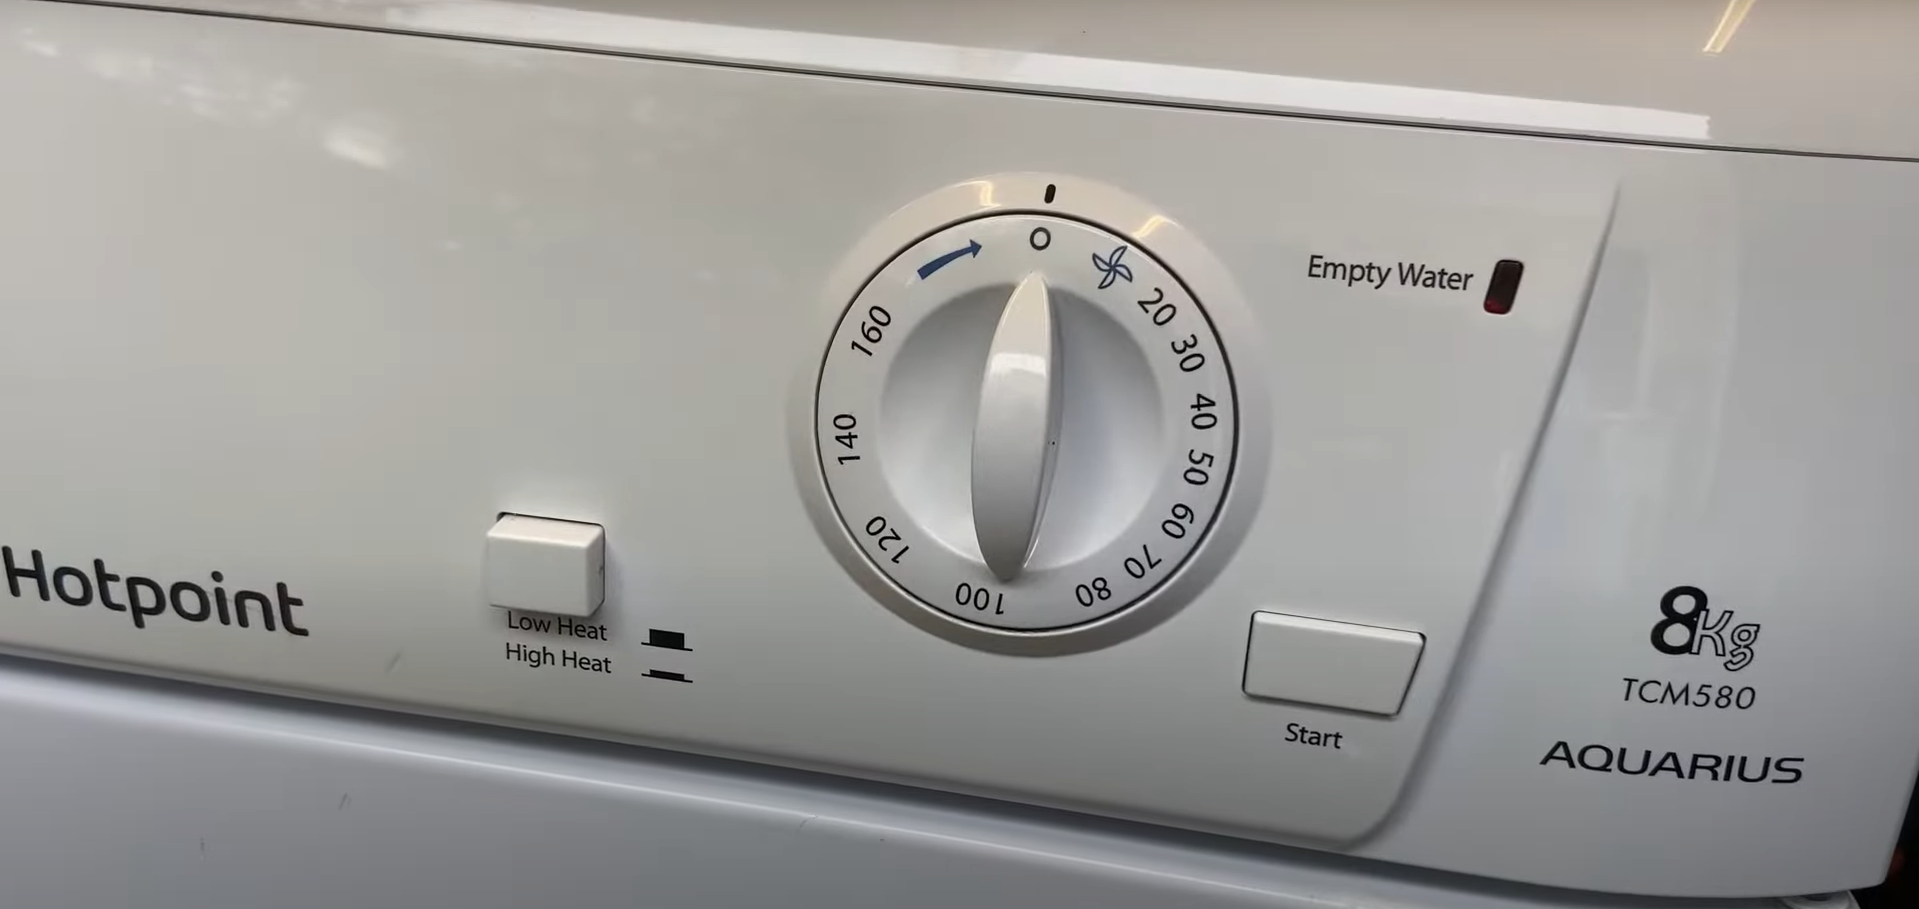 Hotpoint Tumble Dryer with control panel